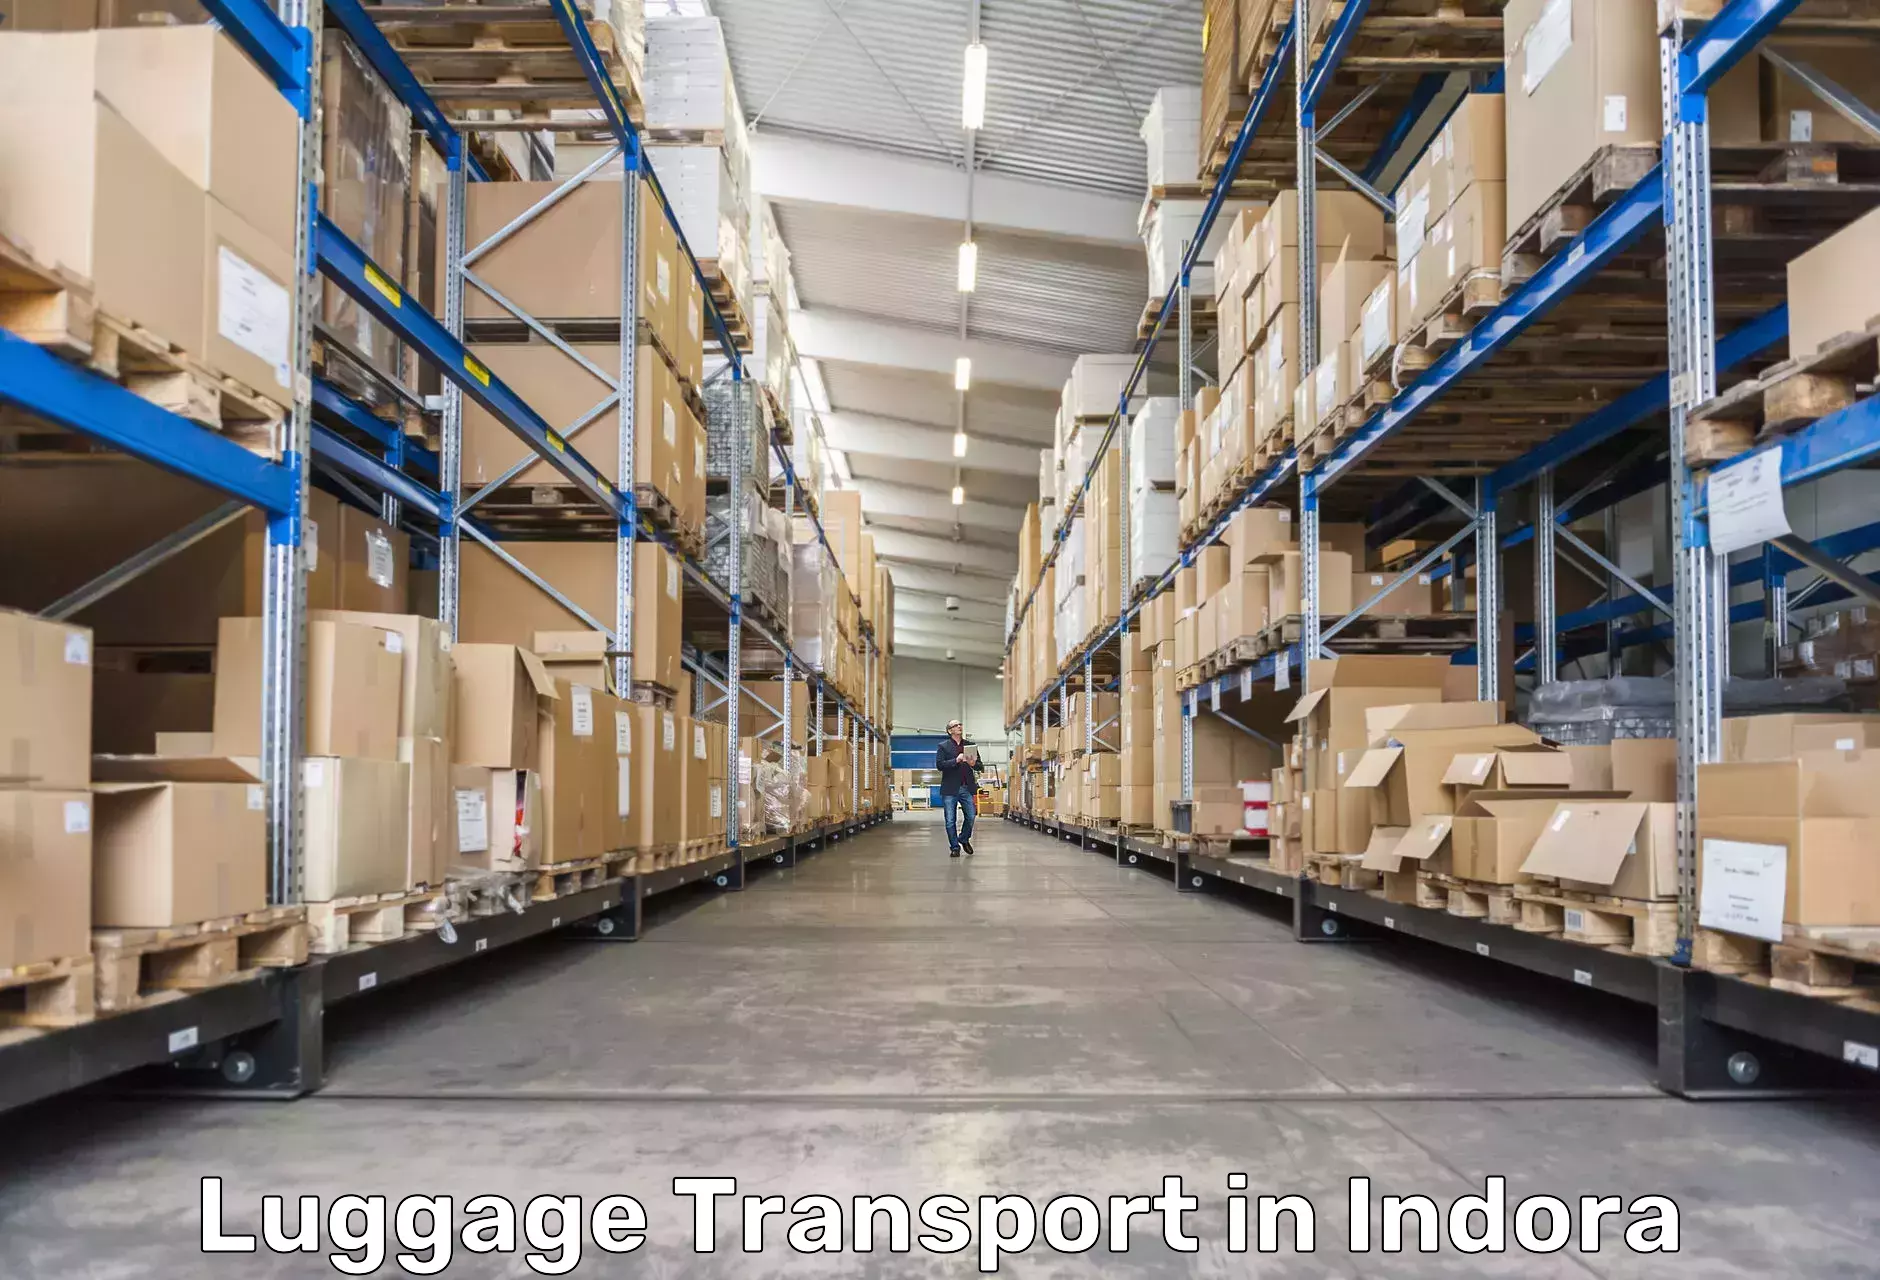 Luggage transport consulting in Indora